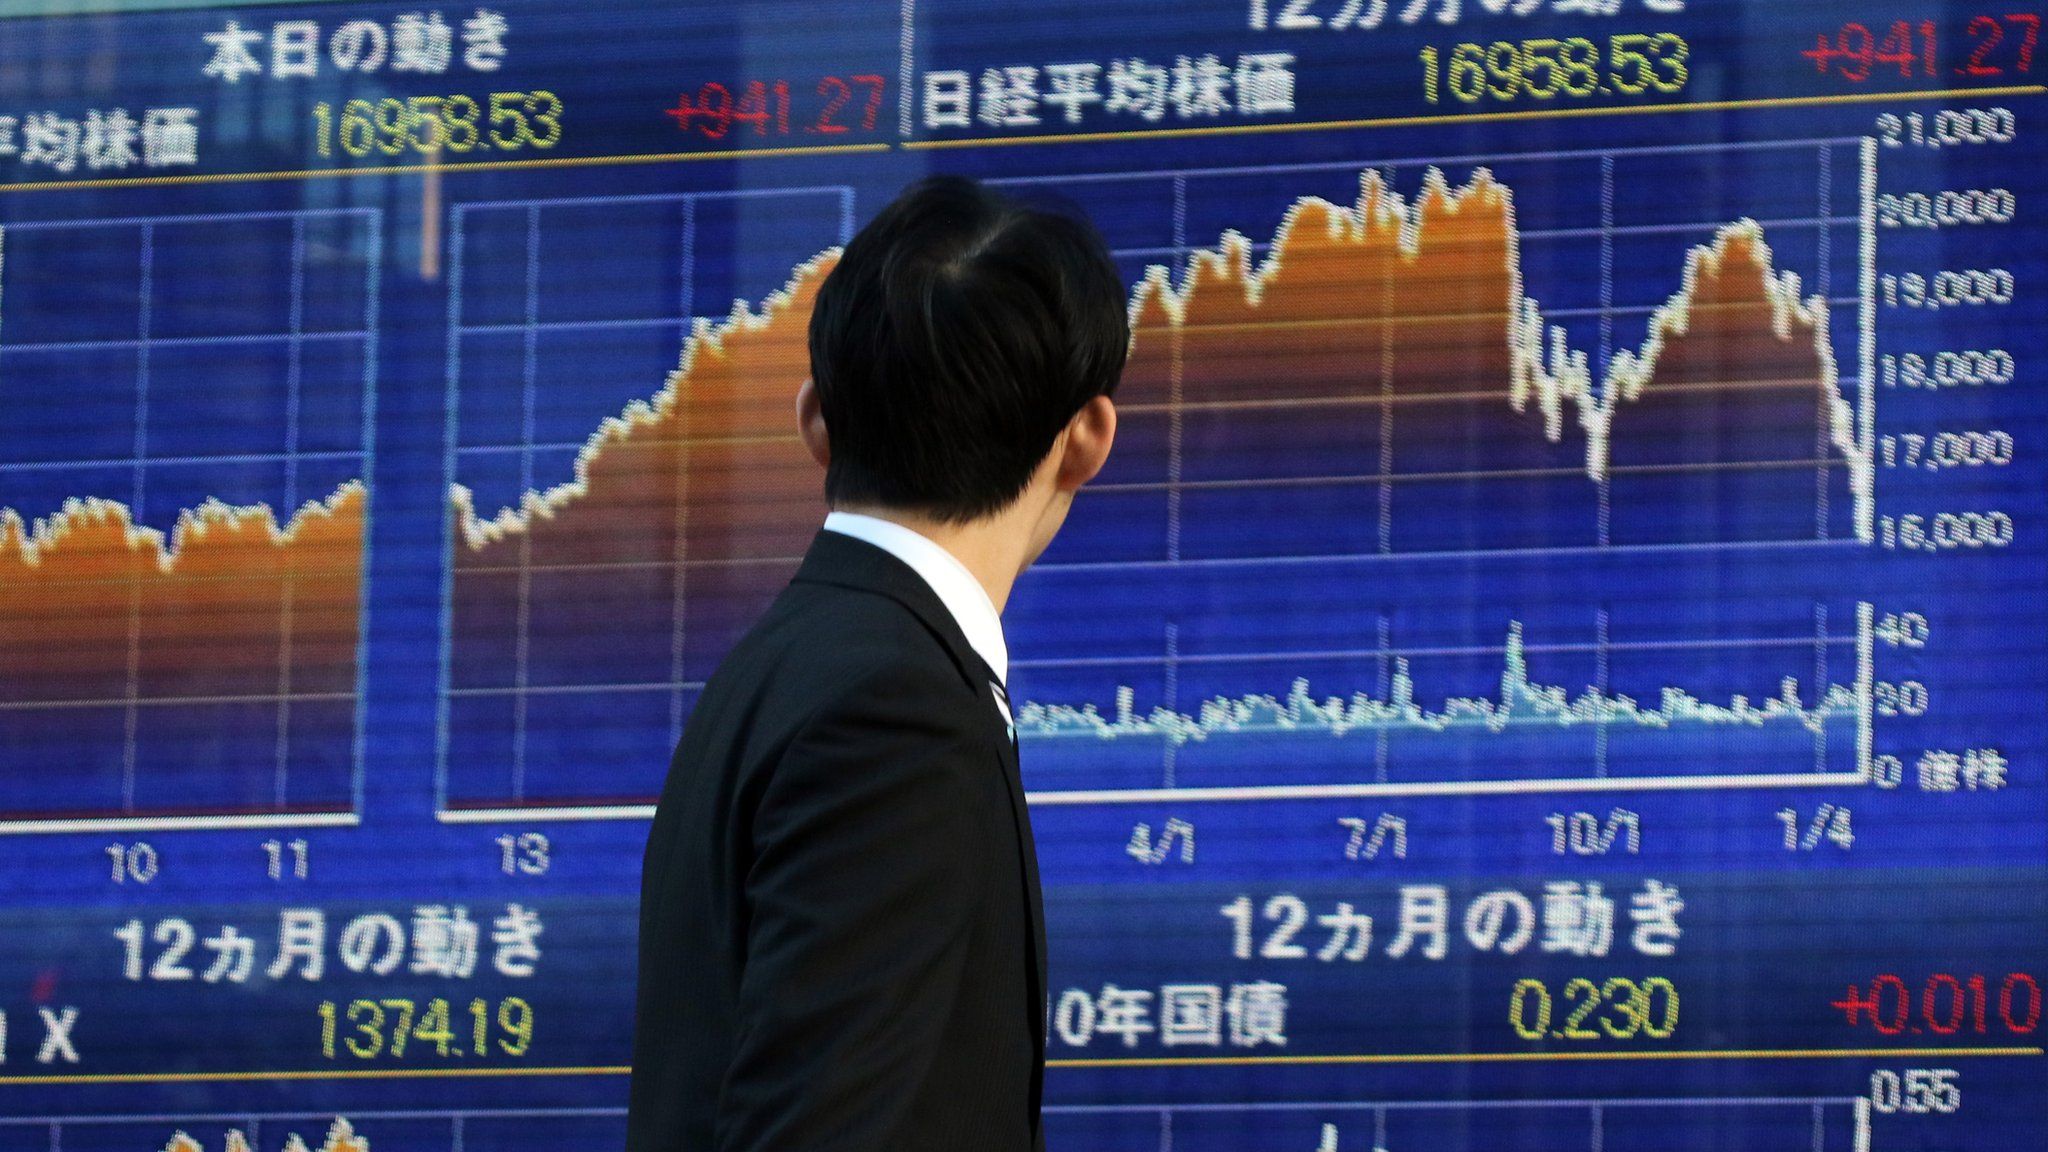 Man in front of board at Tokyo stock exchange